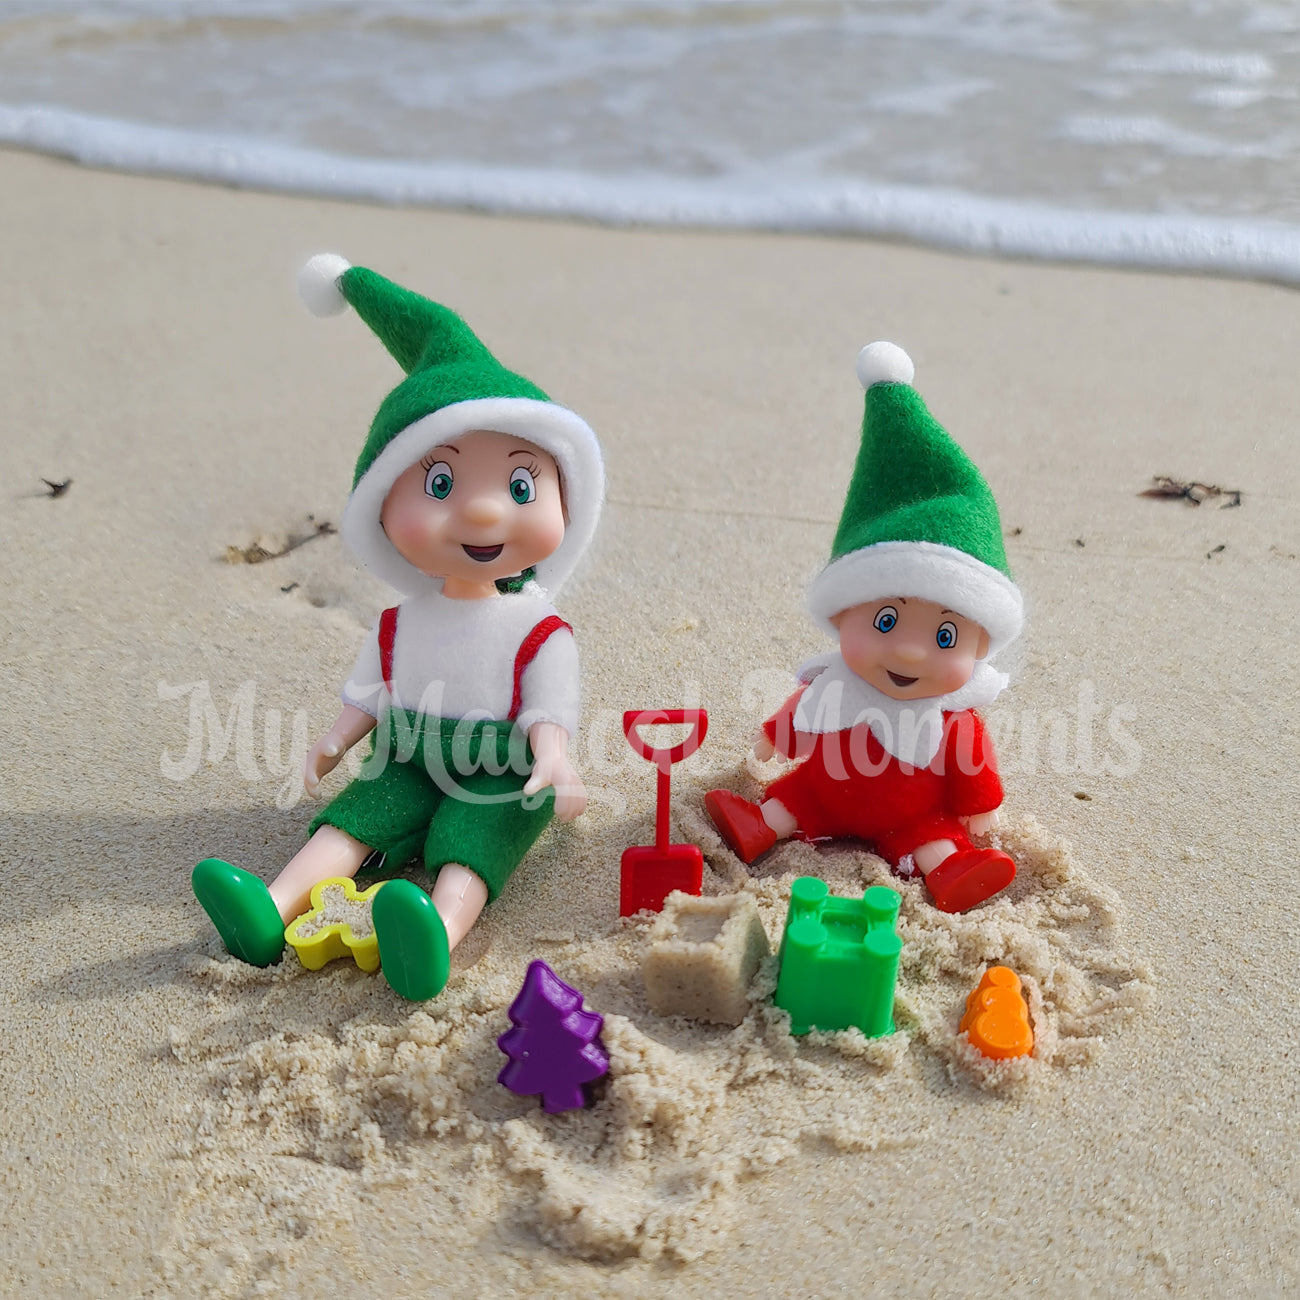 Elf toddler and Elf baby playing with miniature beach sand toys on a beach